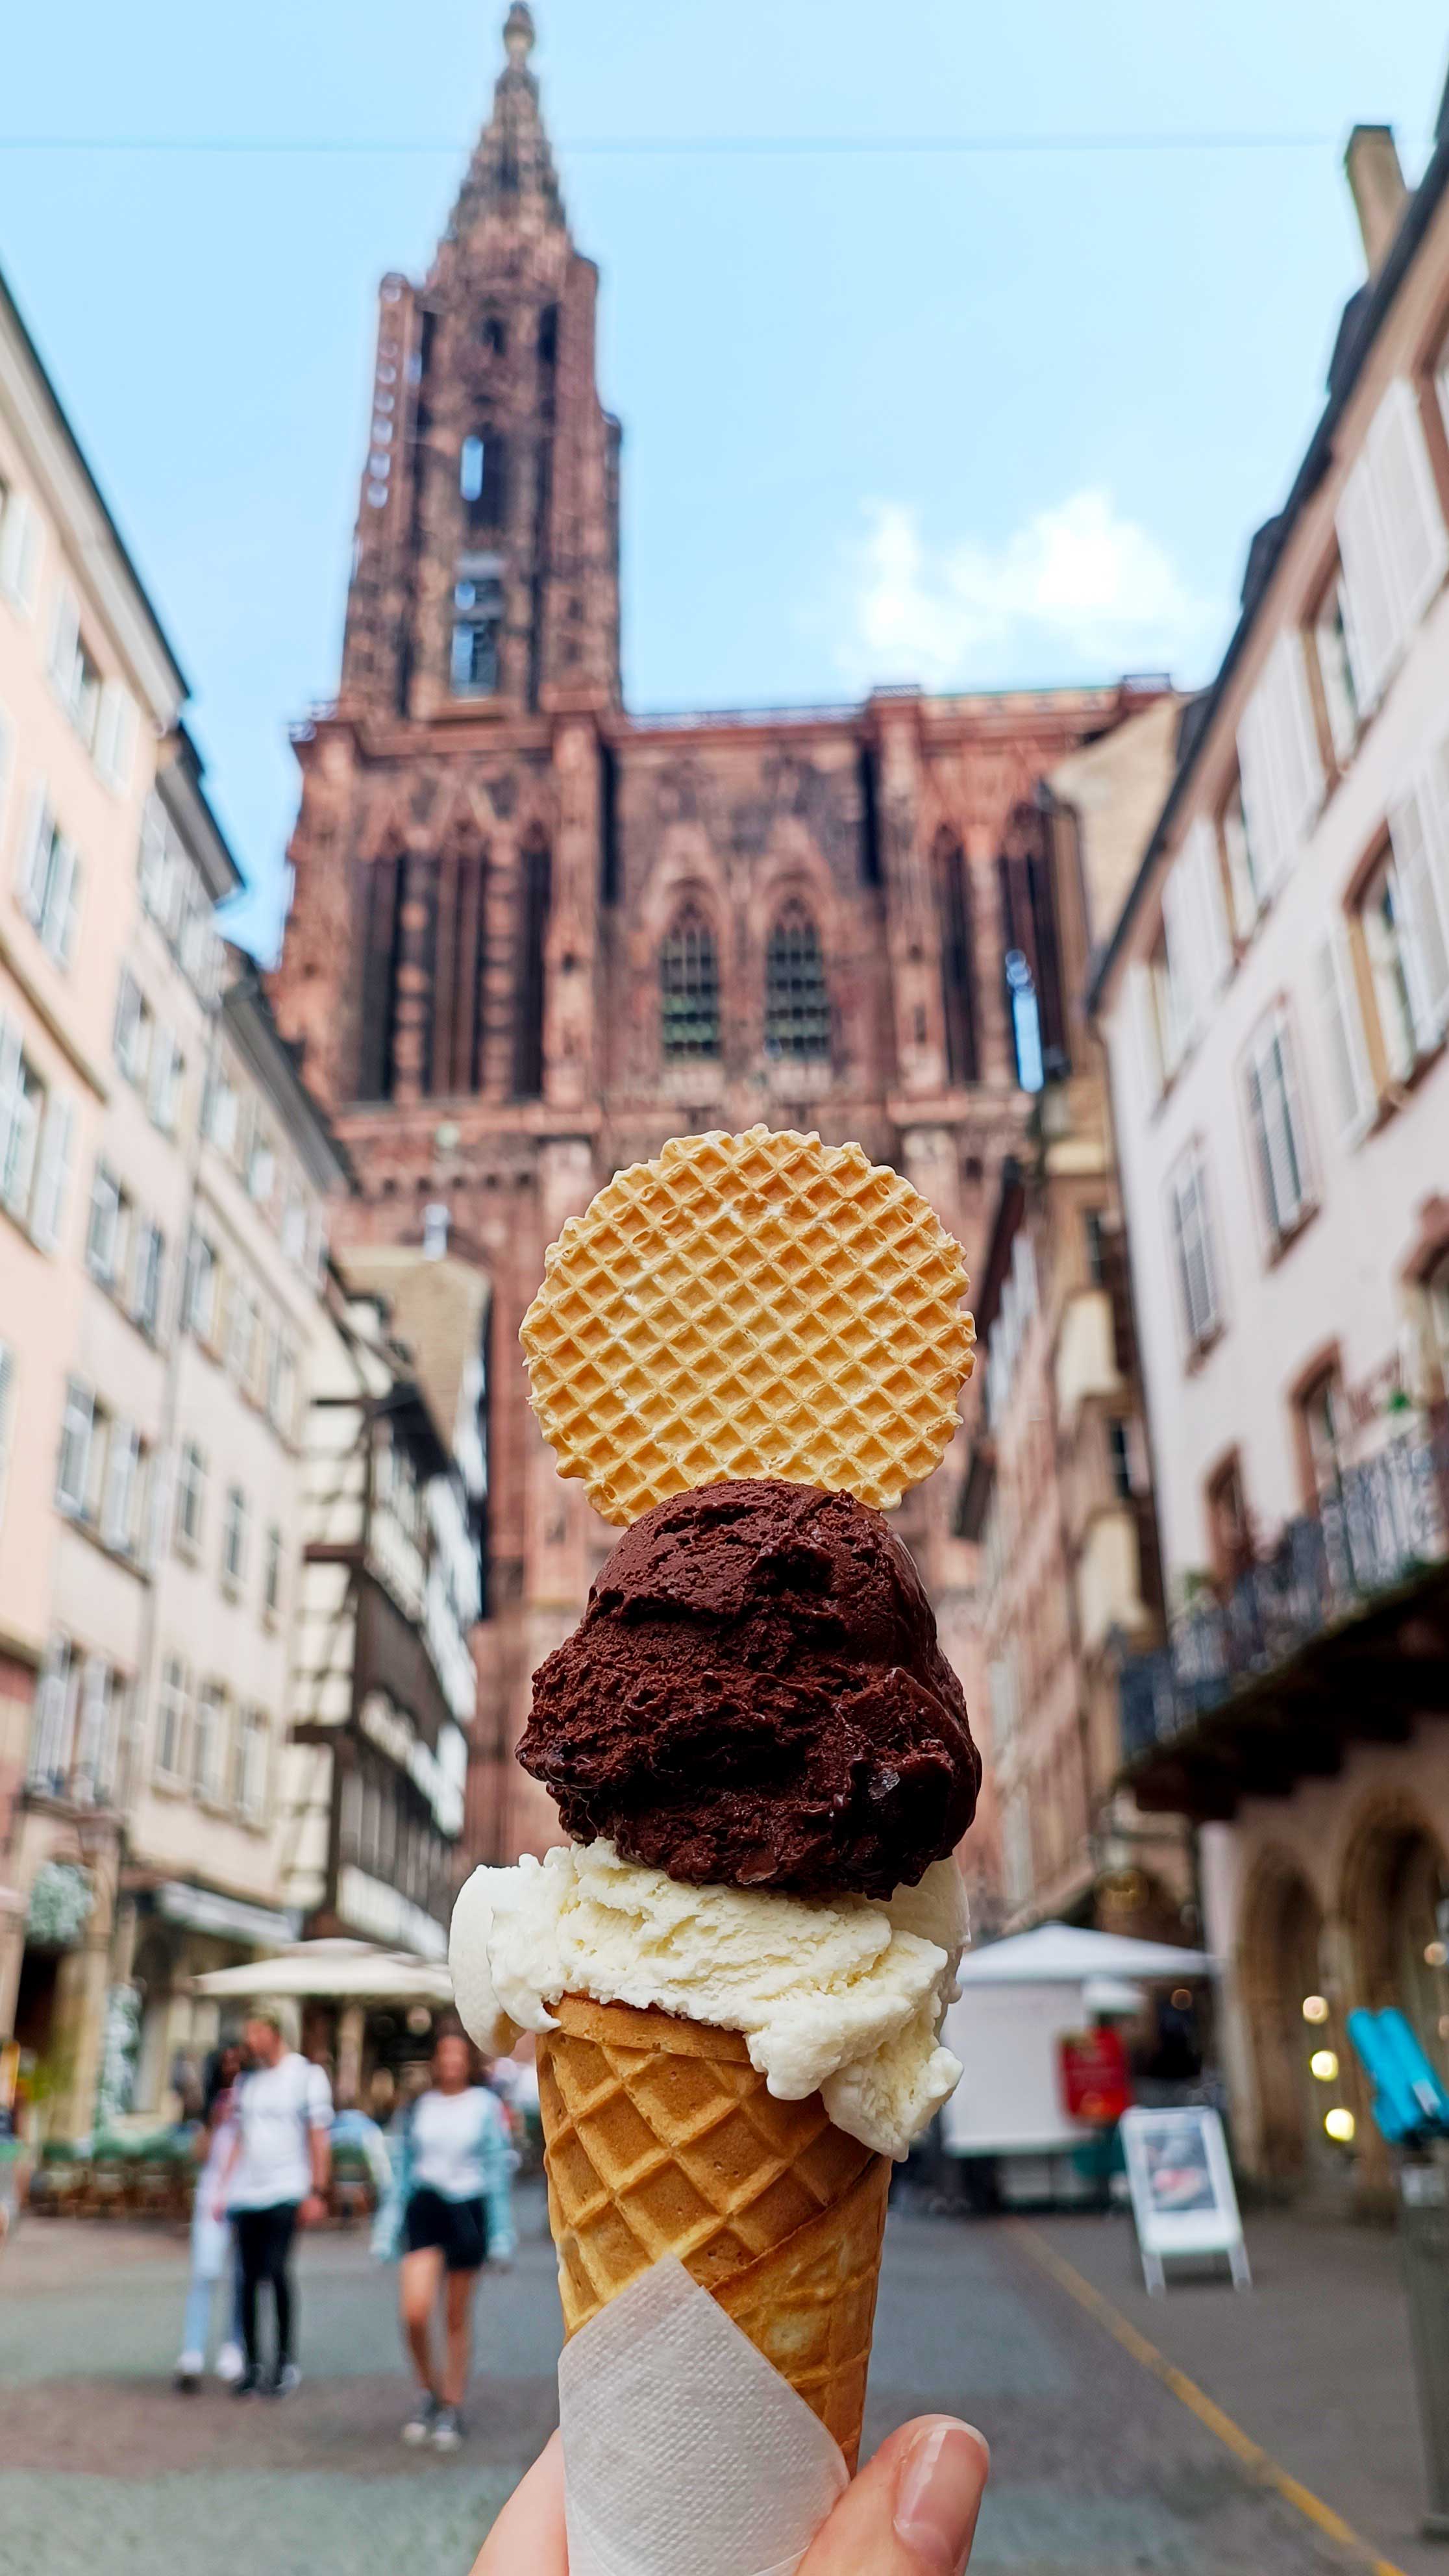 Chocolate and vanilla ice cream in front of the cathedral of Strasbourg